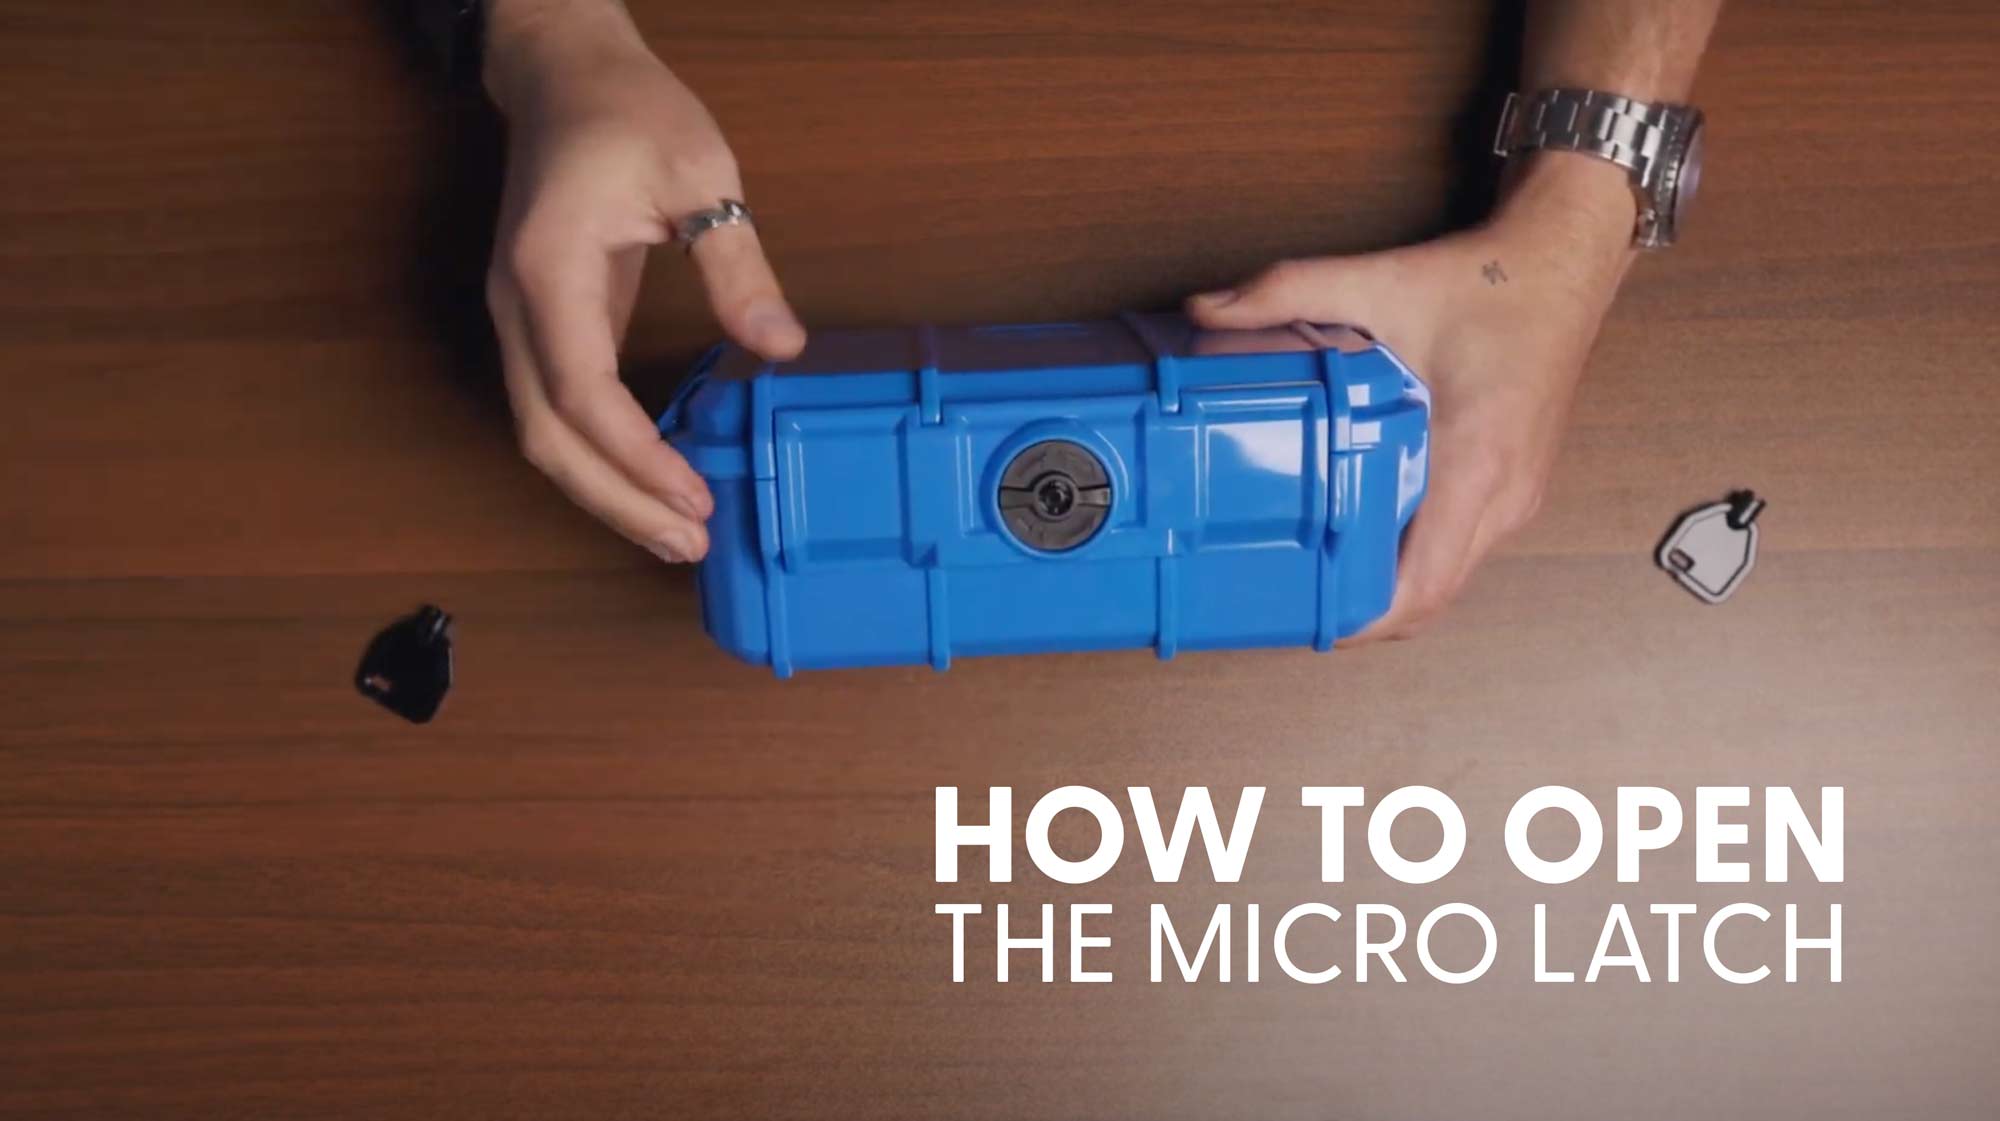 How To Open The Micro Latch